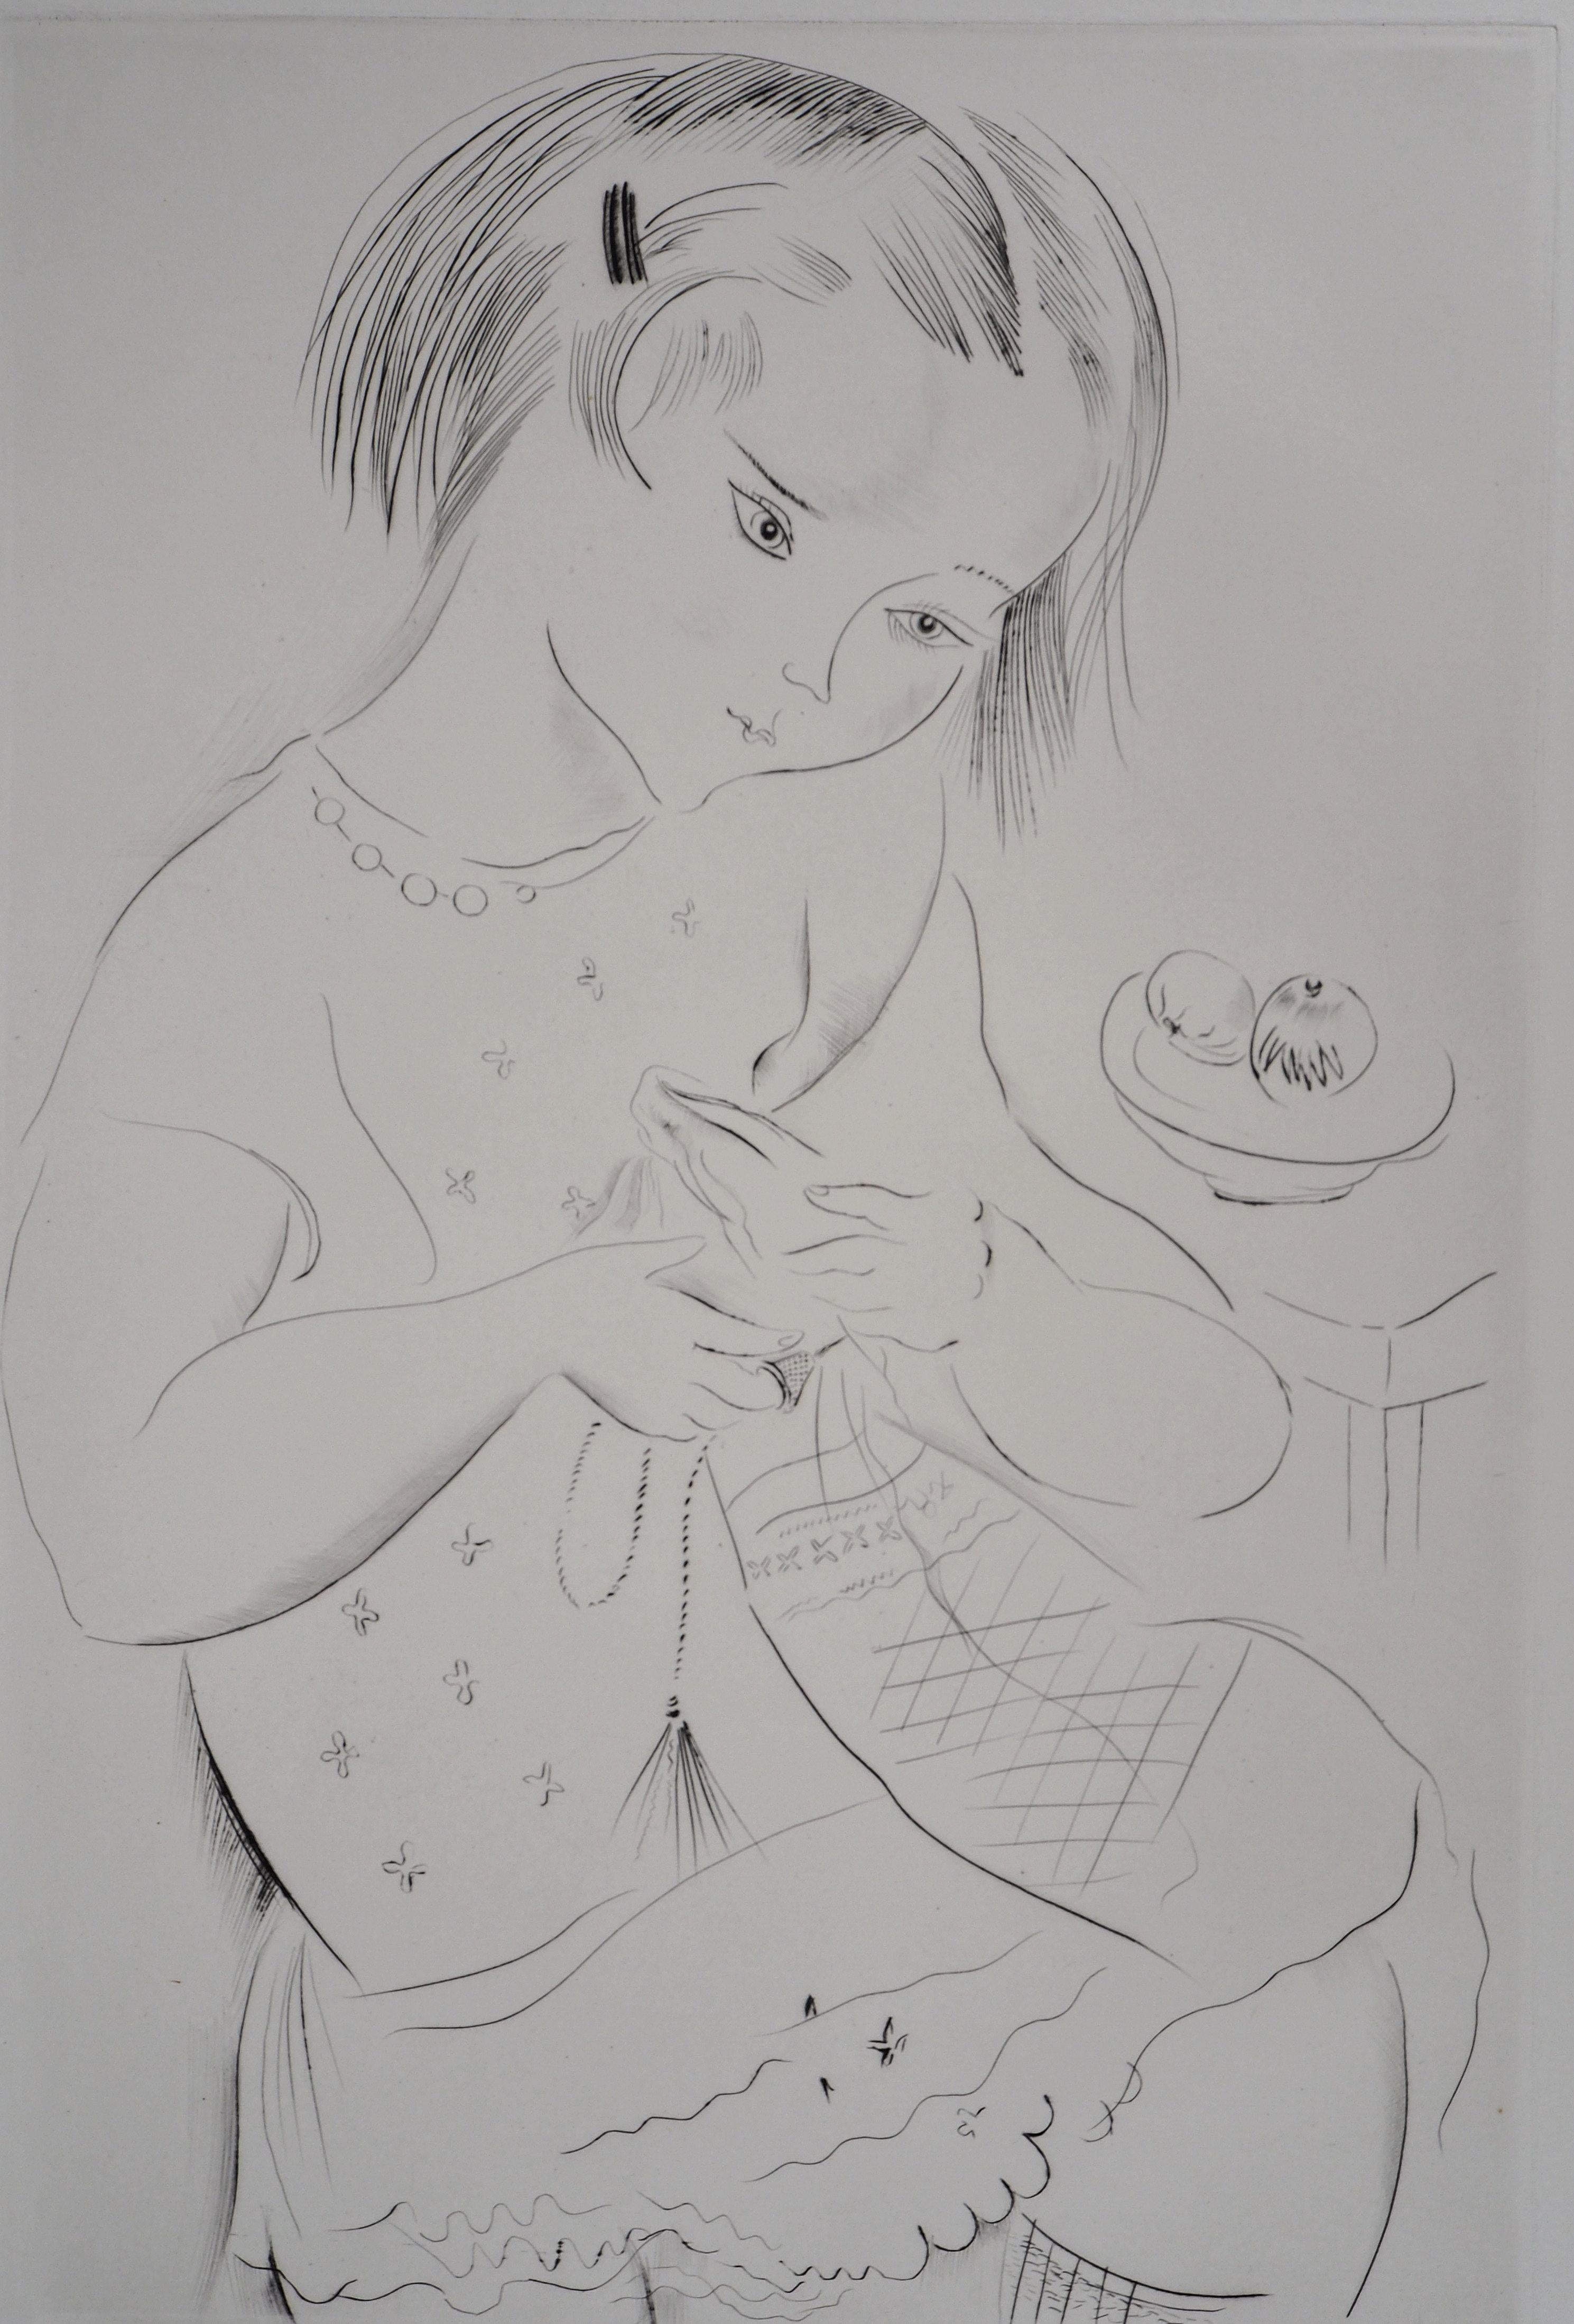 Sewing Girl - Original Handsigned Etching - Gray Figurative Print by Mily Possoz